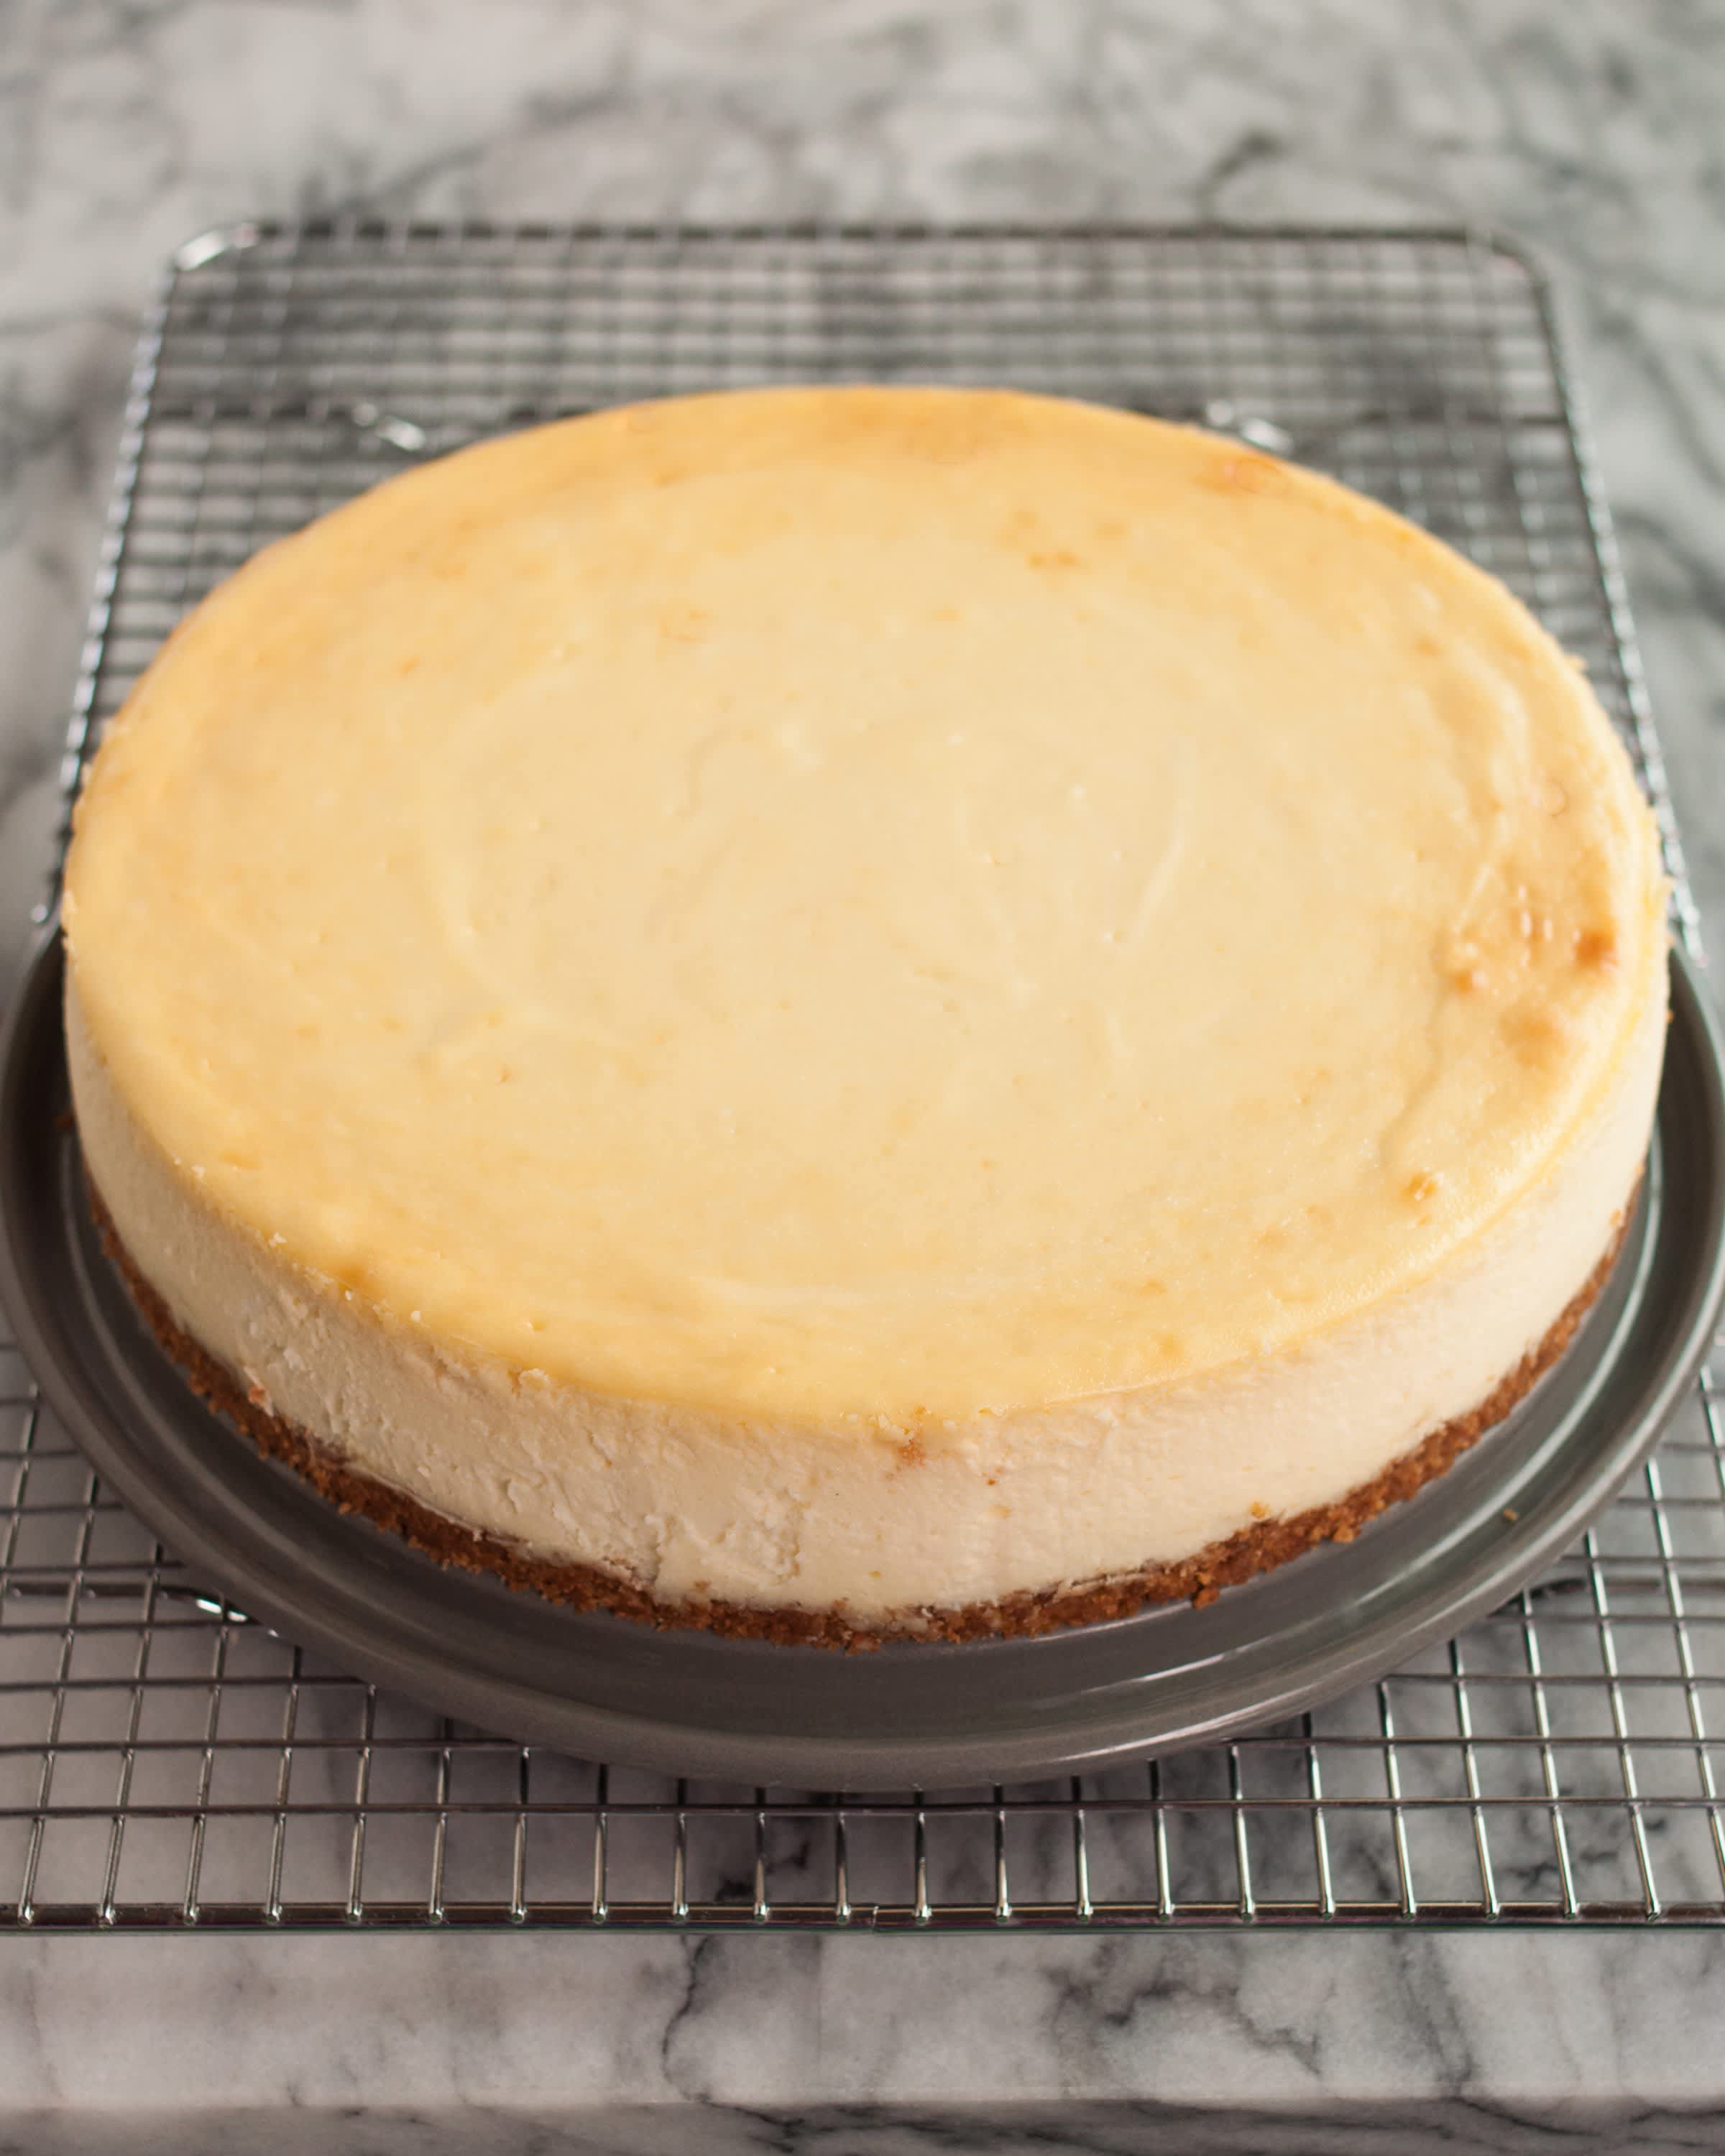 How To Make Perfect Cheesecake - Step-By-Step Recipe | Kitchn